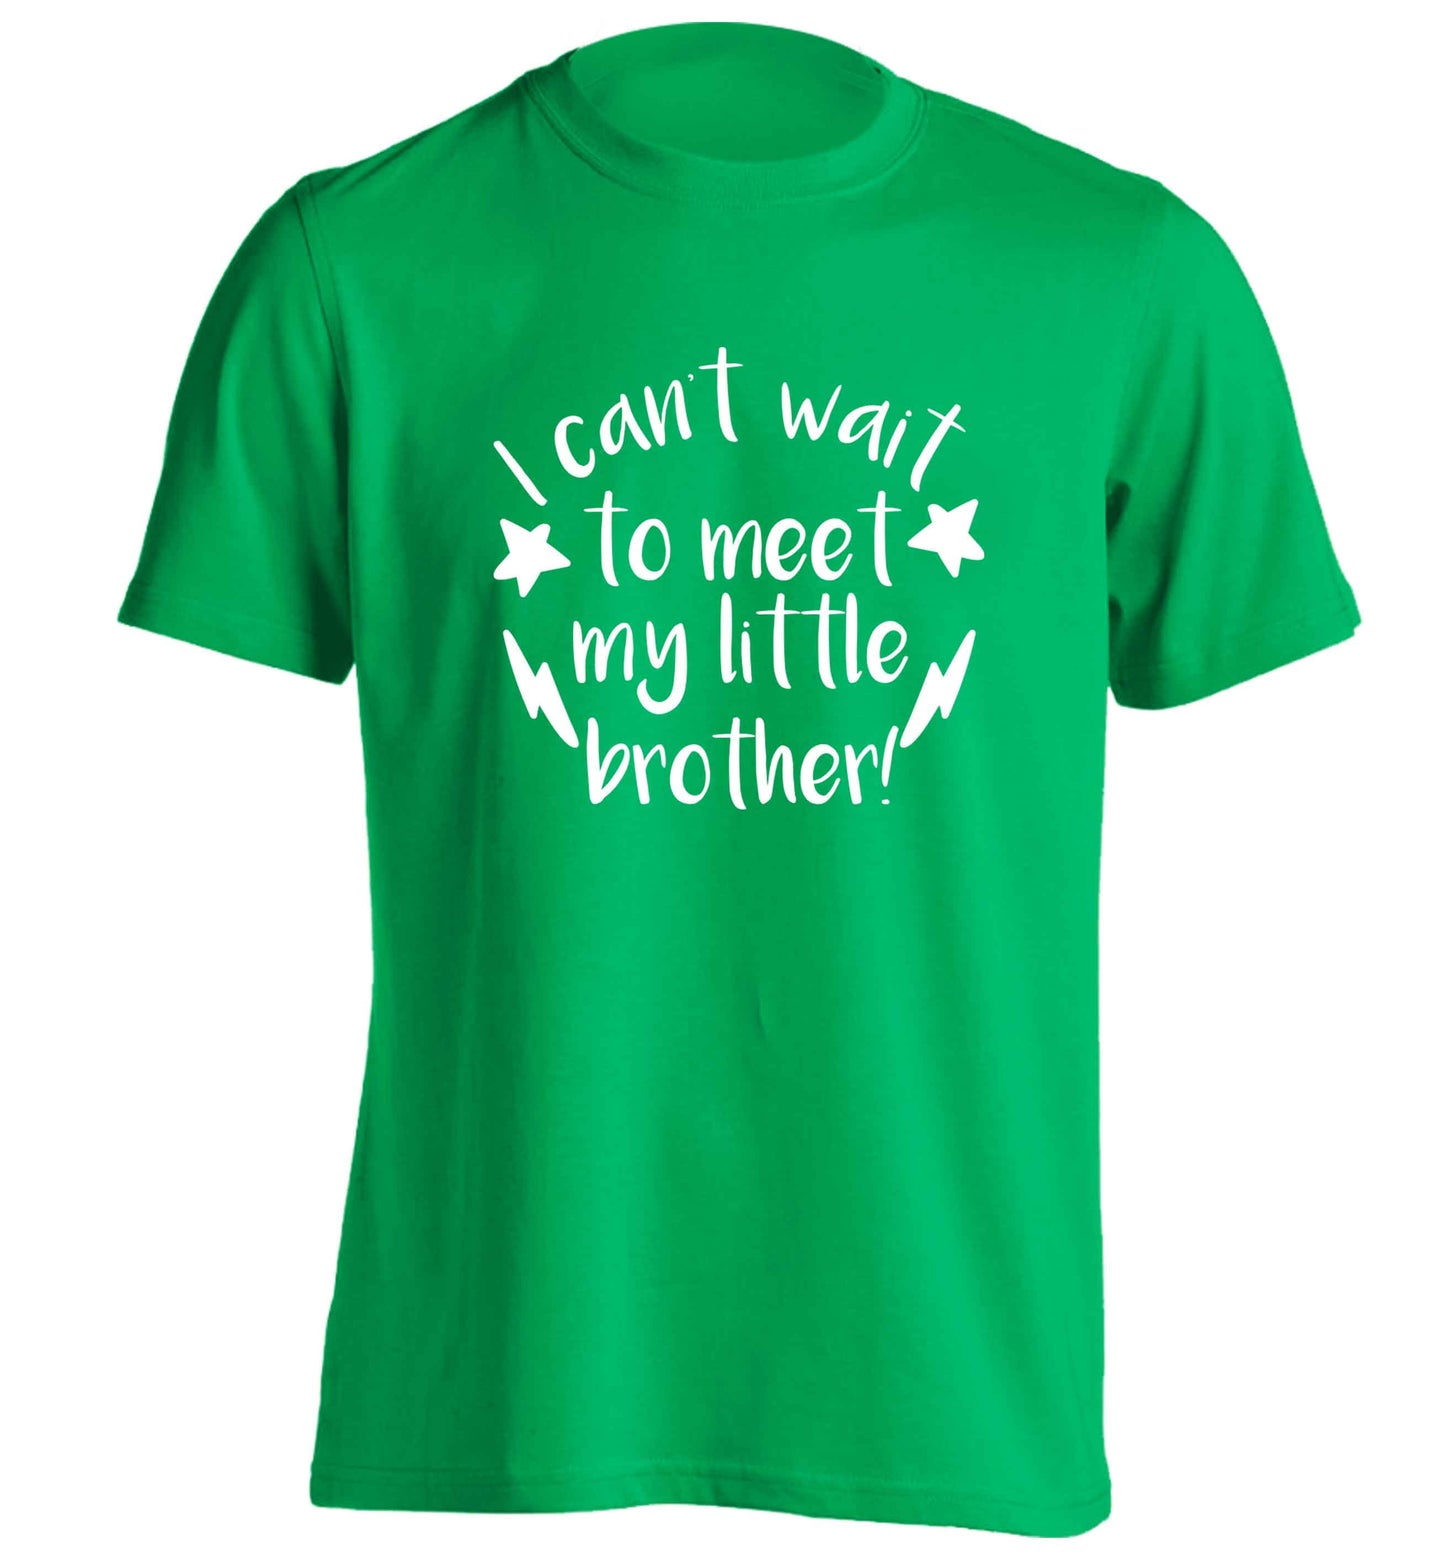 I can't wait to meet my sister! adults unisex green Tshirt 2XL